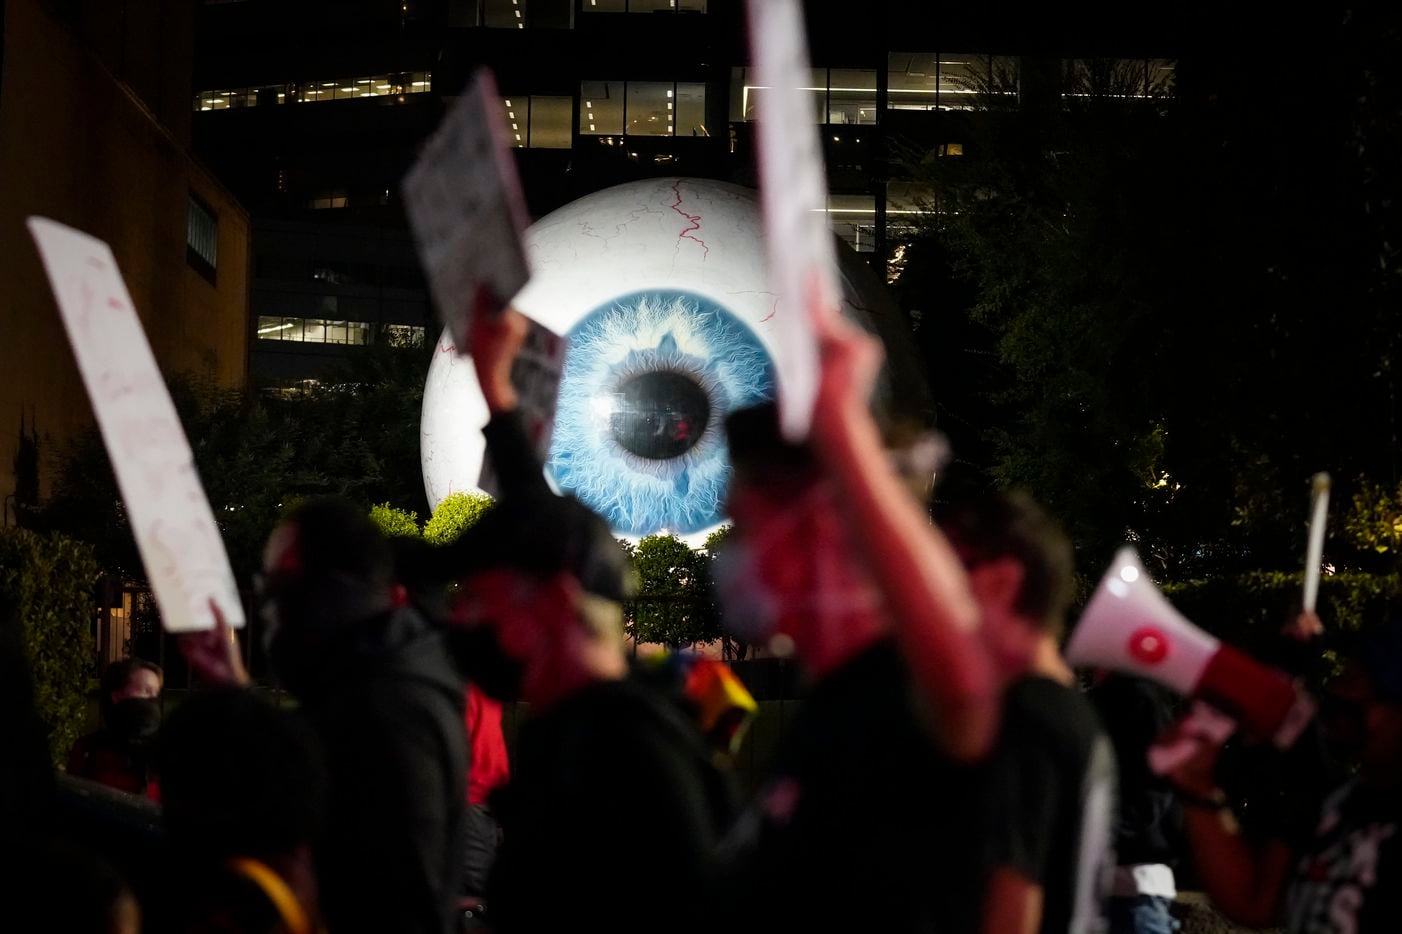 Demonstrators pass artist Tony Tasset’s giant eyeball sculpture, "Eye" on Main Street as they march in downtown Dallas after a Kentucky grand jury brought no charges against Louisville police for the killing of Breonna Taylor on Wednesday, Sept. 23, 2020.